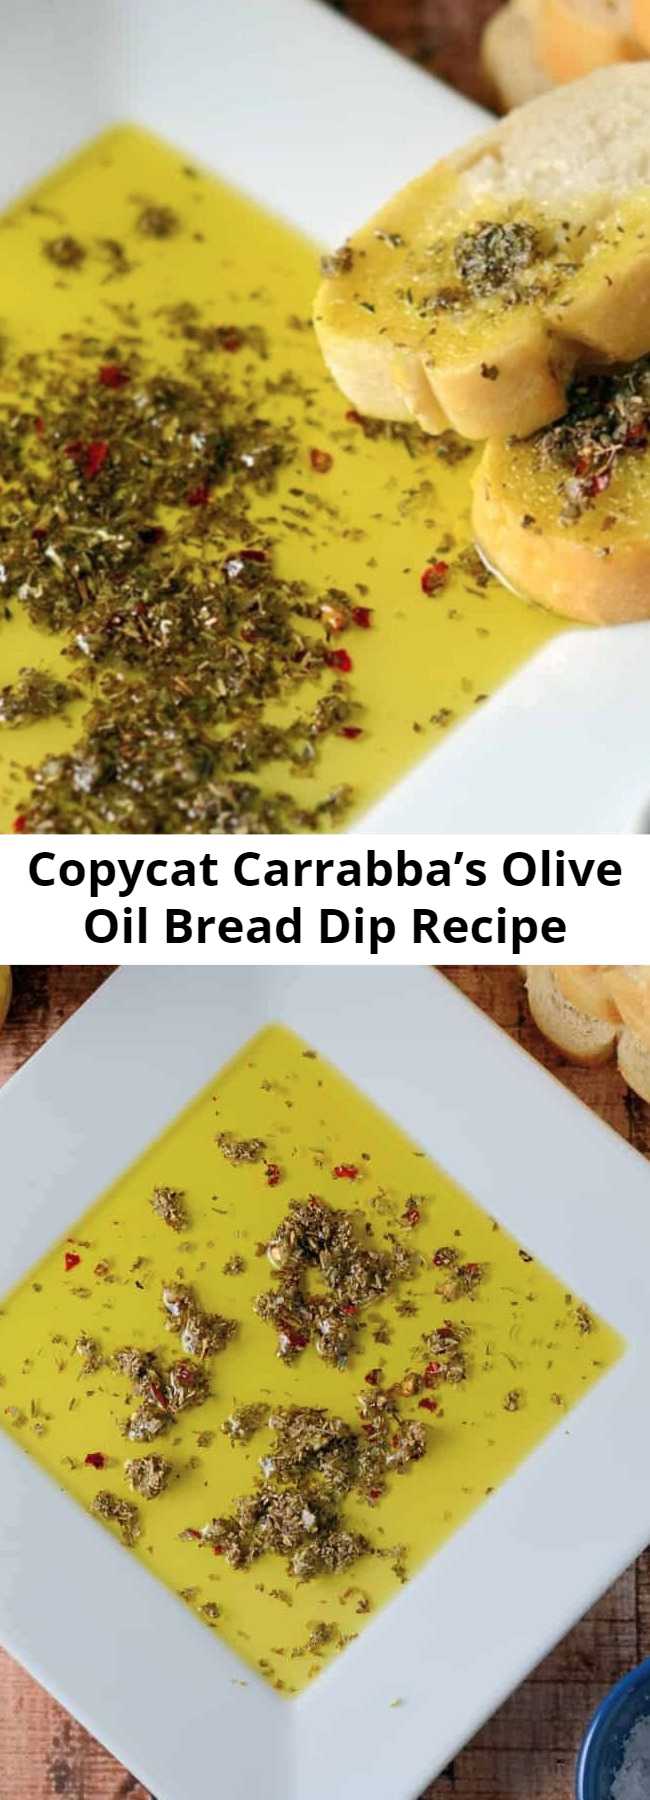 Copycat Carrabba’s Olive Oil Bread Dip Recipe - The best bread dip recipe out there! Use as a dipping sauce for cheese, meats, drizzle on salads or mix into pasta sauce. These are the best dipping spices to make ahead and keep it in the pantry!